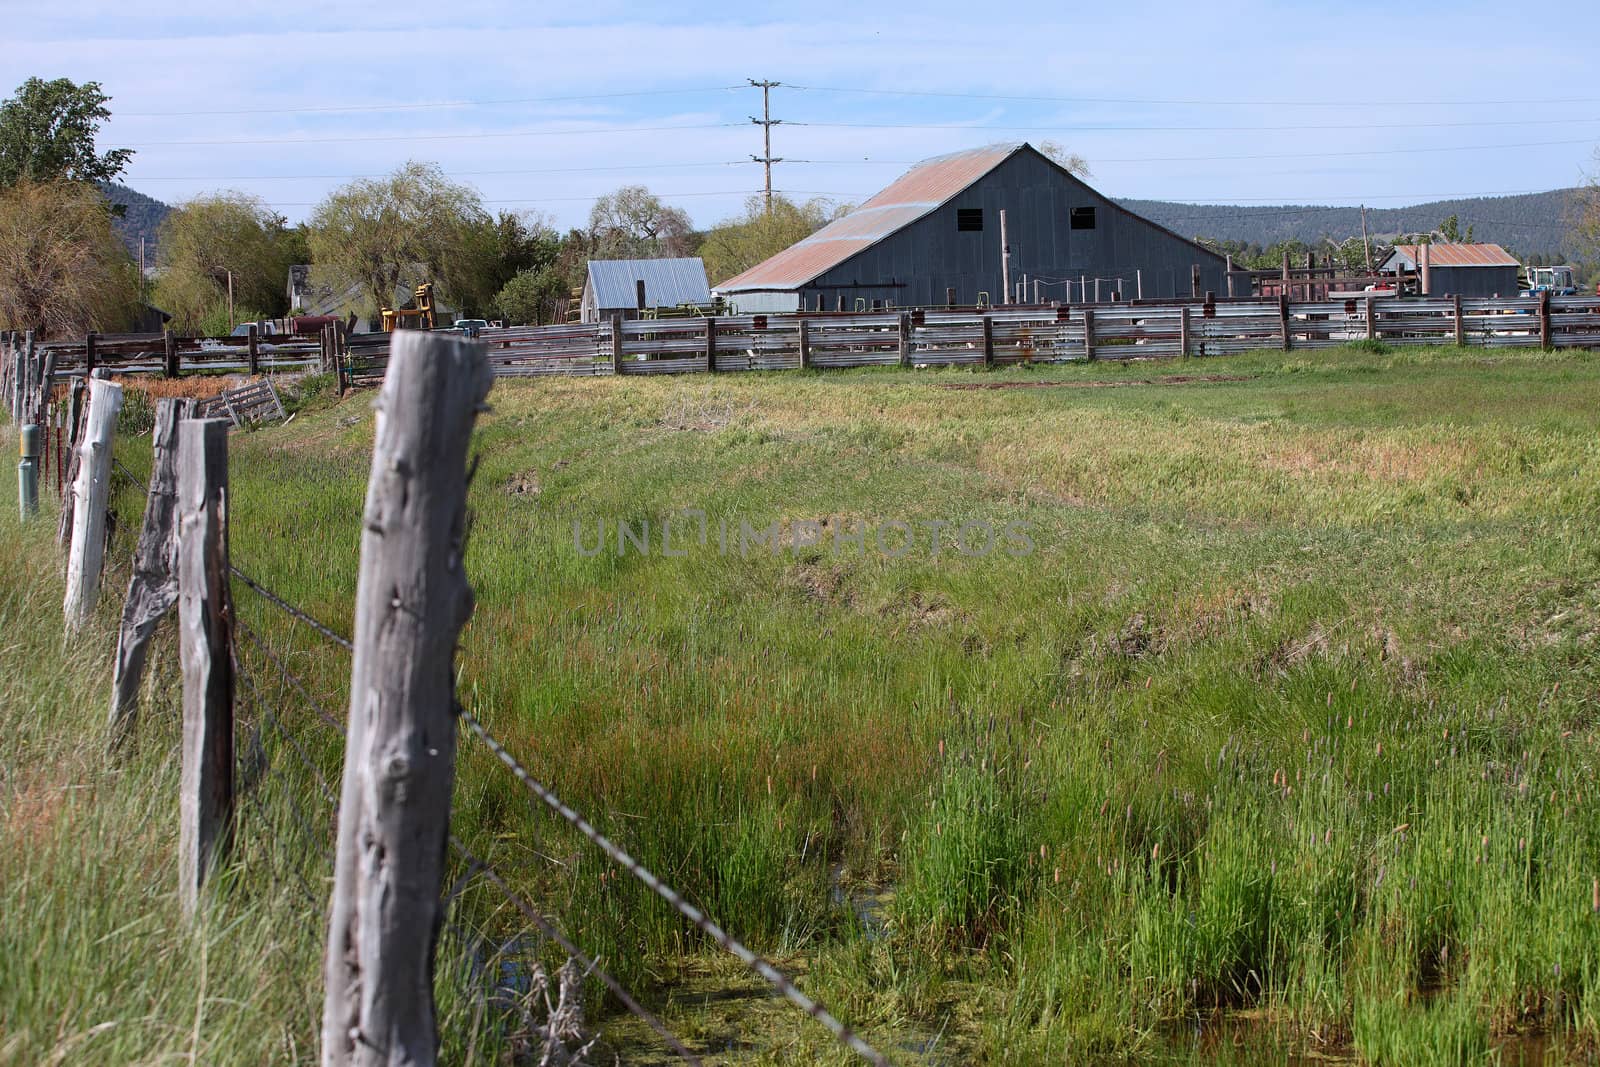 Old farmhouse and fences in southern Oregon.